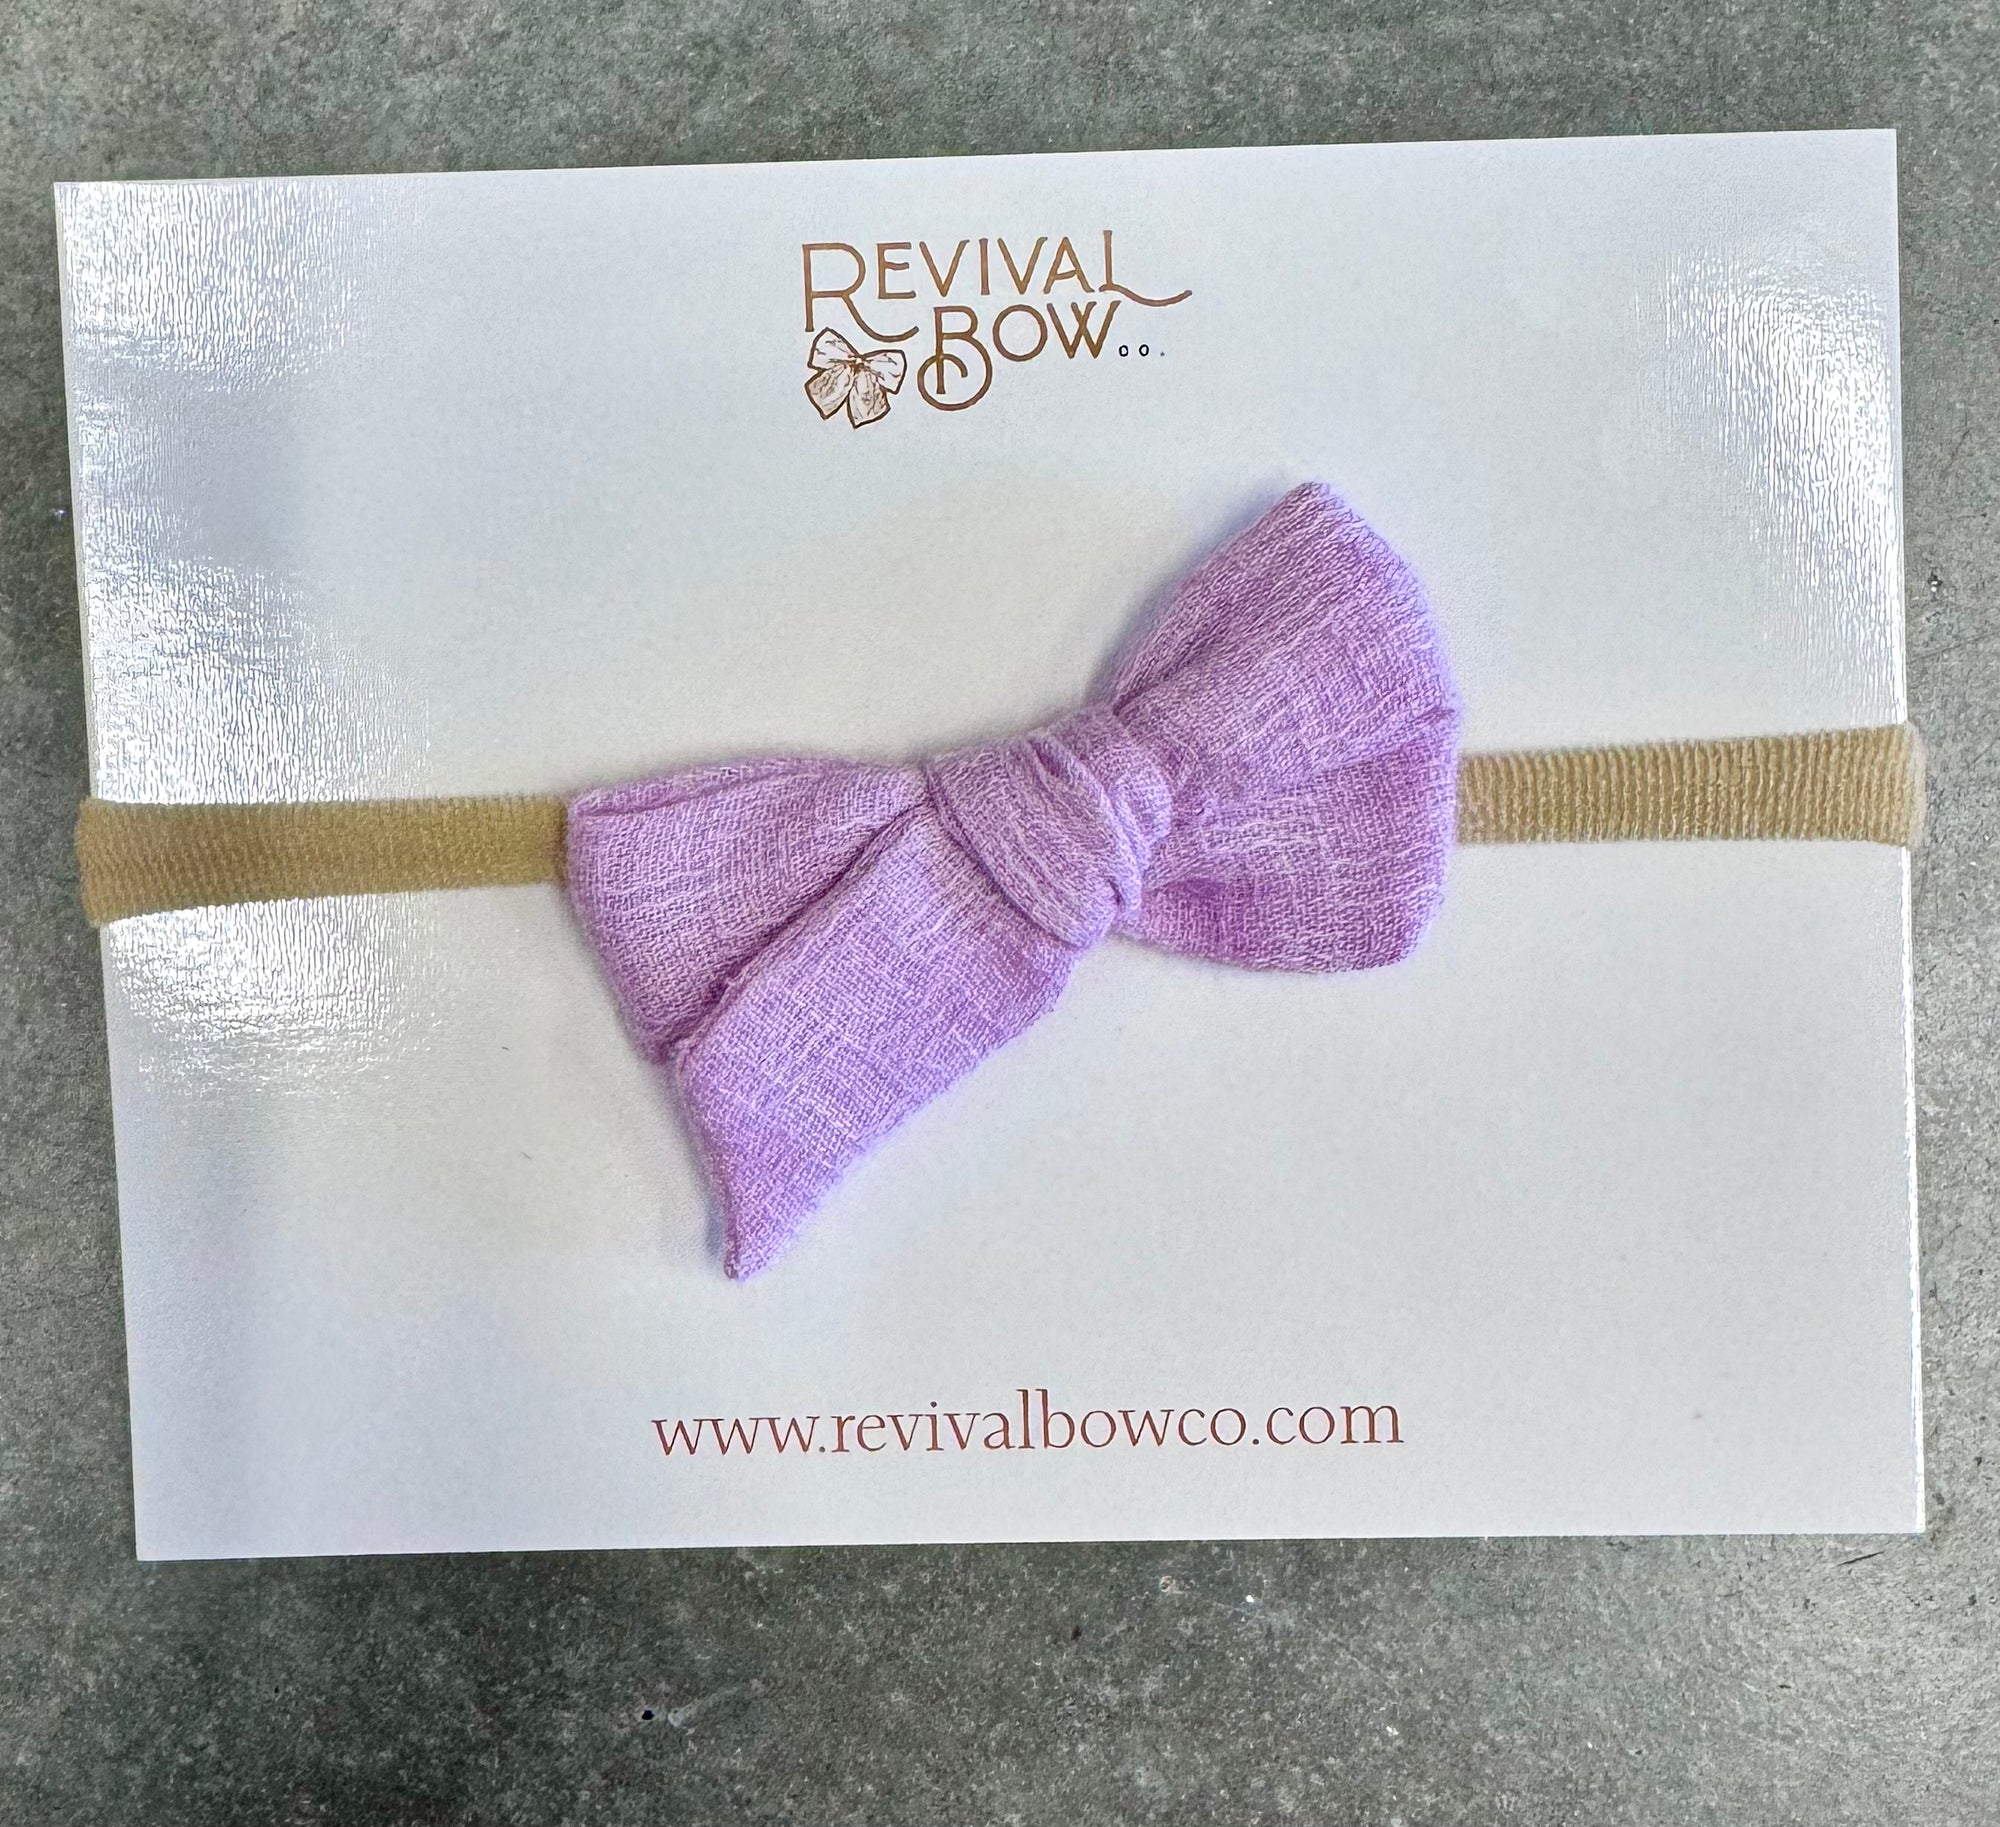 Revival Bow Co. Mini Hand Tied Baby Bow - Lavender